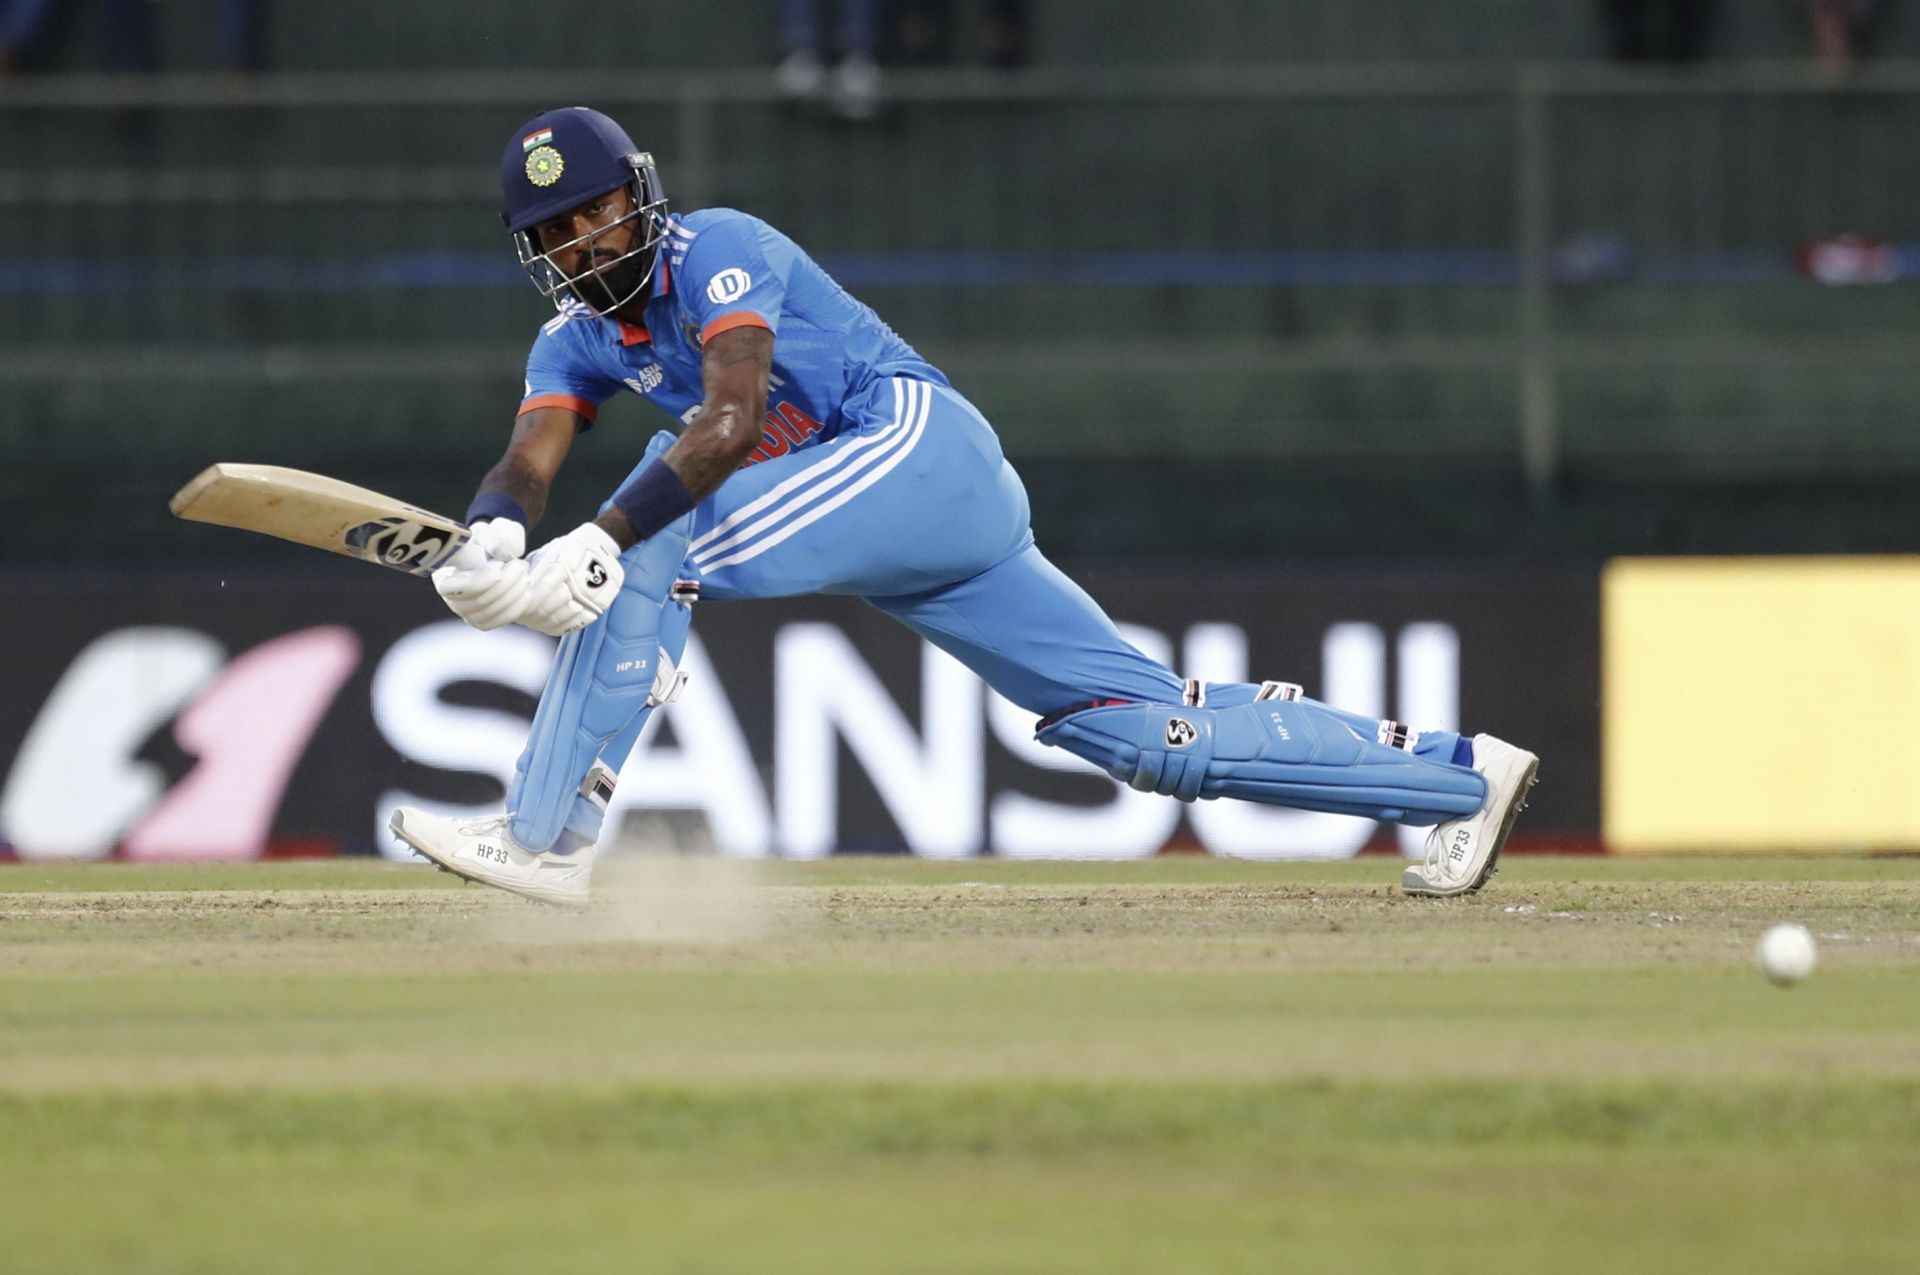 Hardik Pandya&#039;s batting form has been a bit scratchy lately, but he looked good against Pakistan